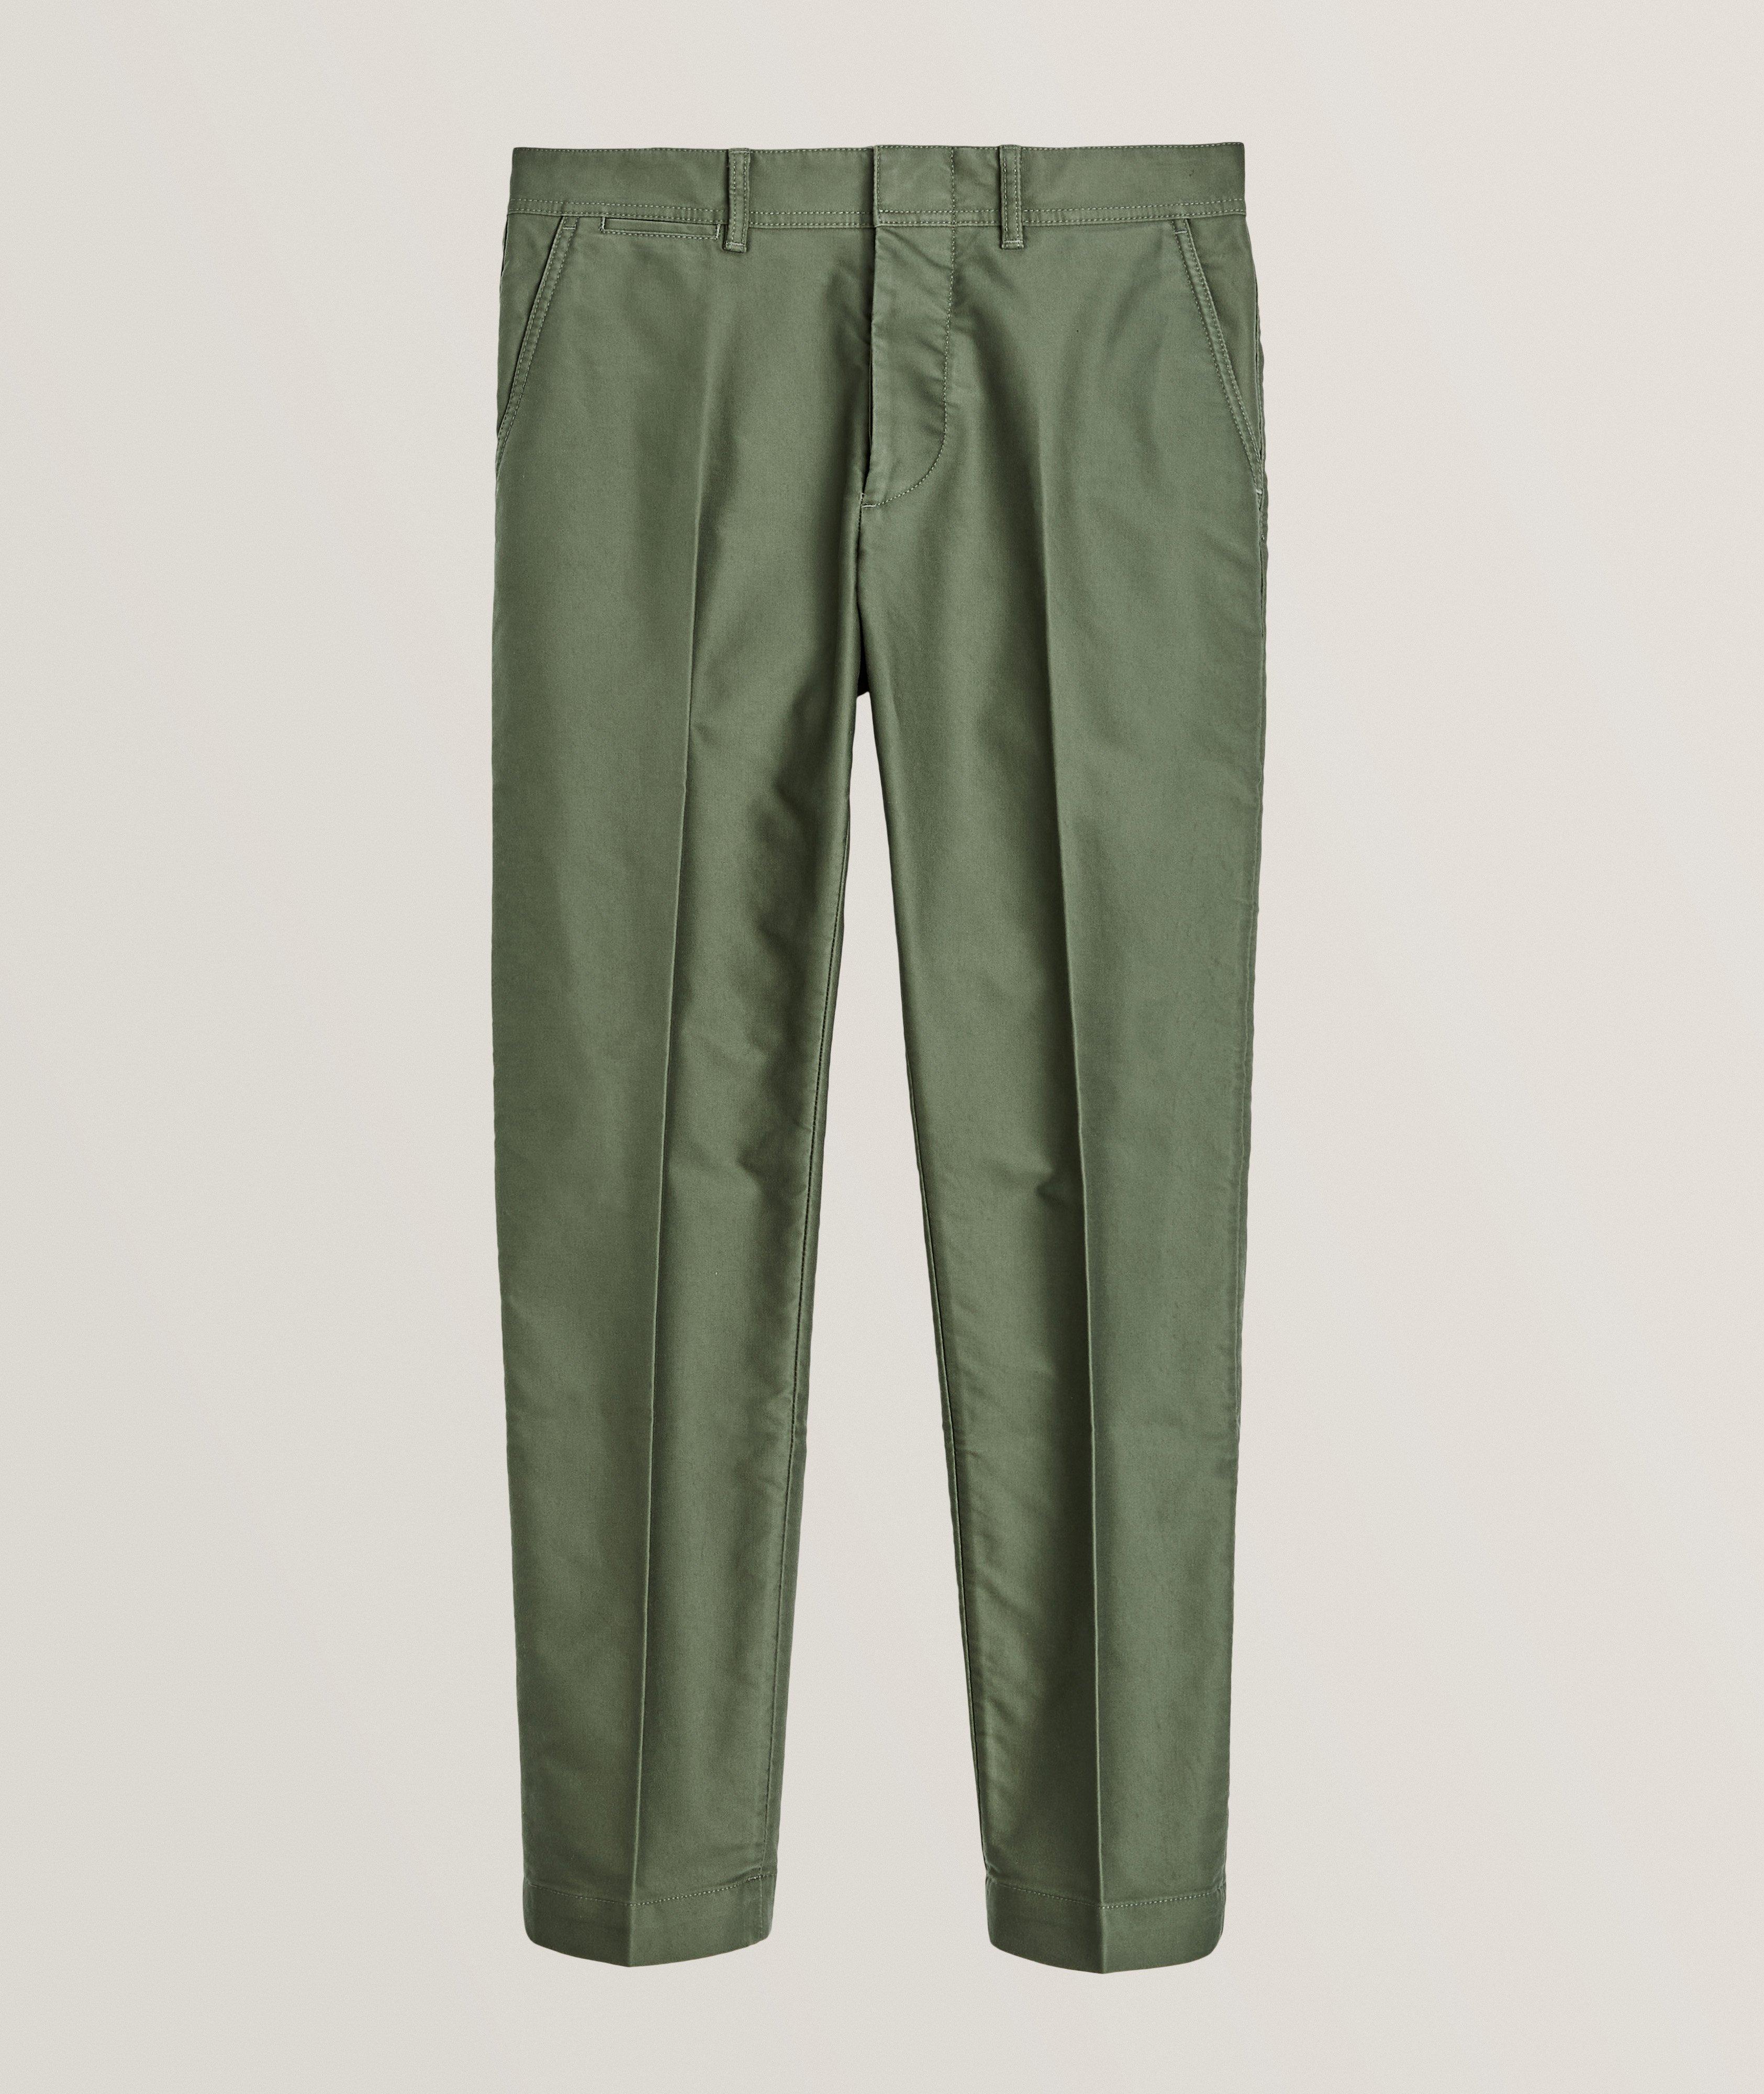 TOM FORD Military Pleated Cotton Chinos